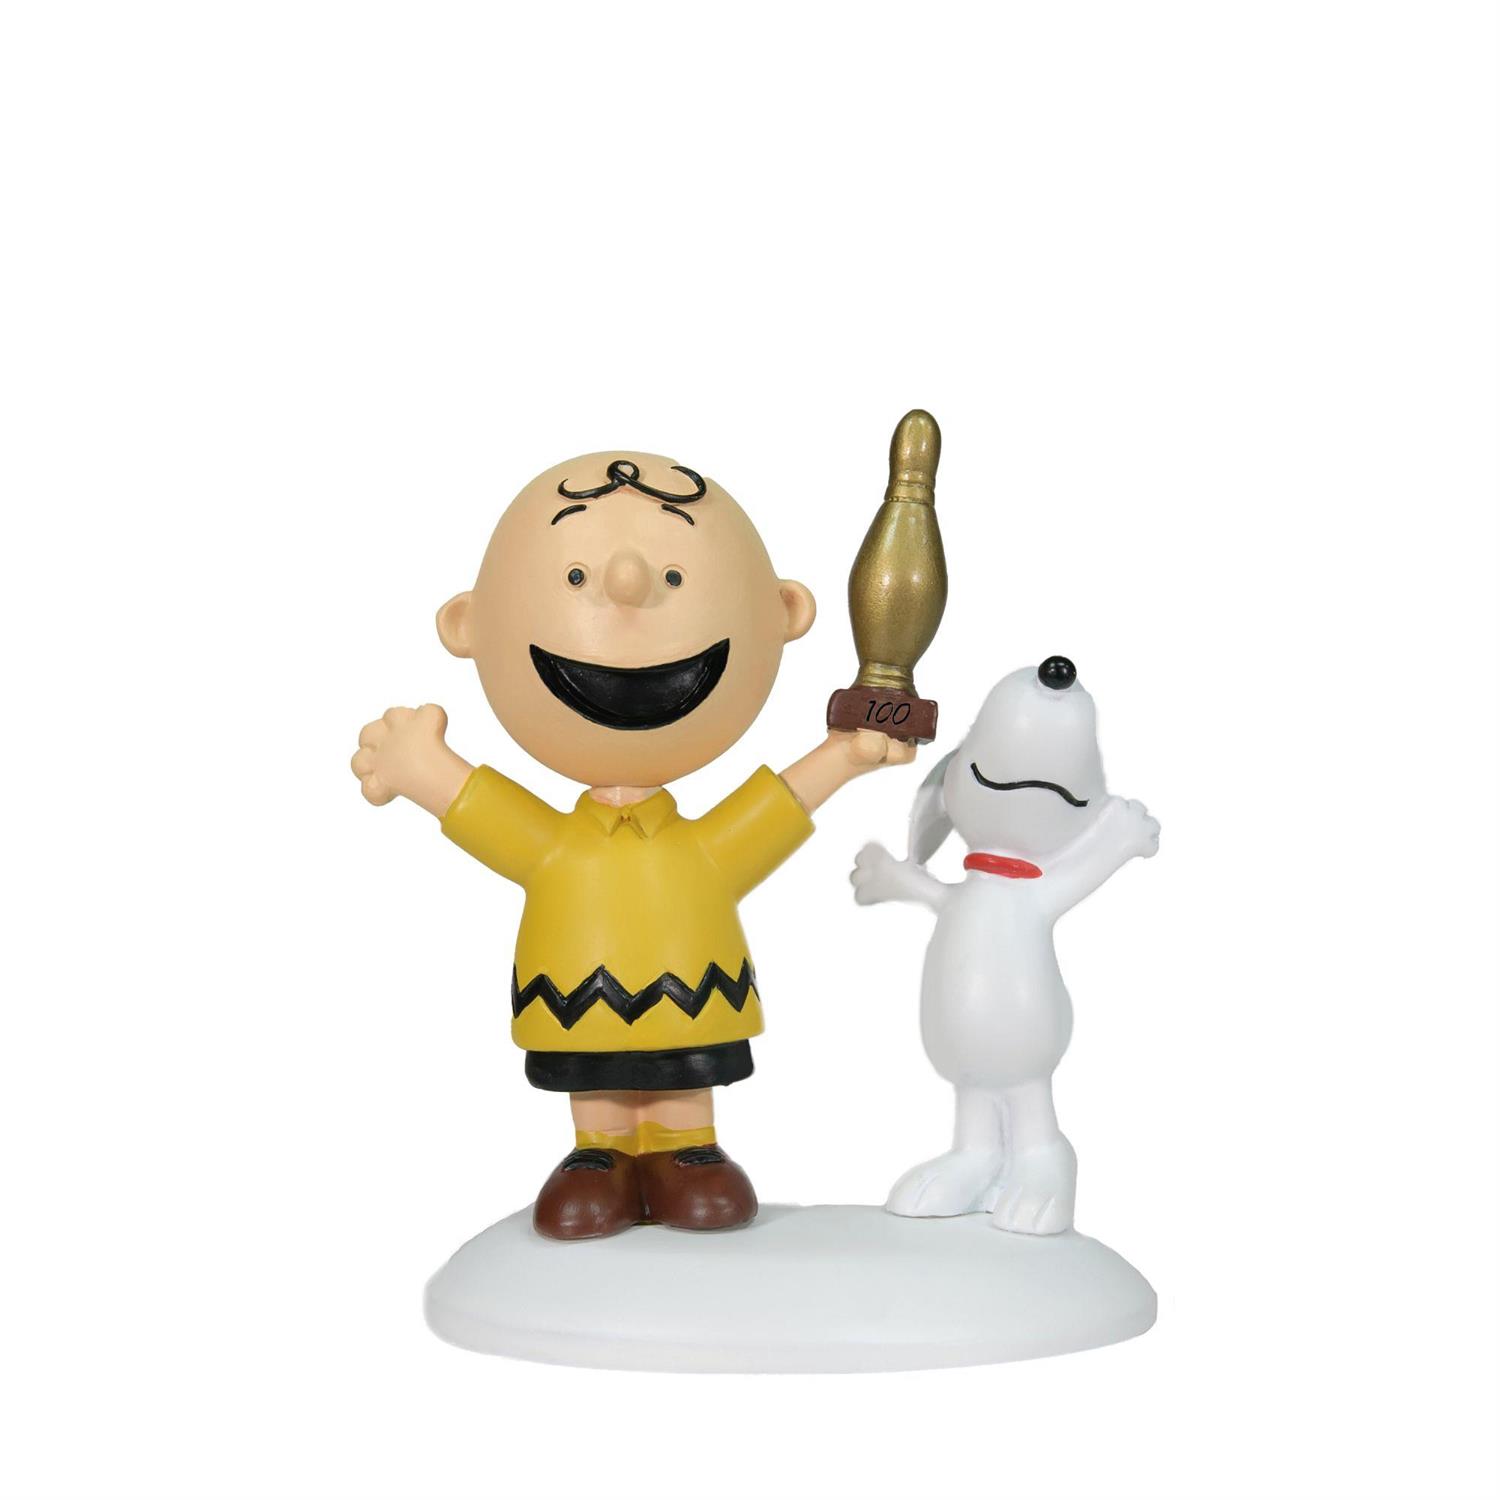 Enesco Gifts Jim Shore Peanuts Charlie Brown Breaks100 Bowllibg Figurine Free Shipping Iveys Gifts And Decor